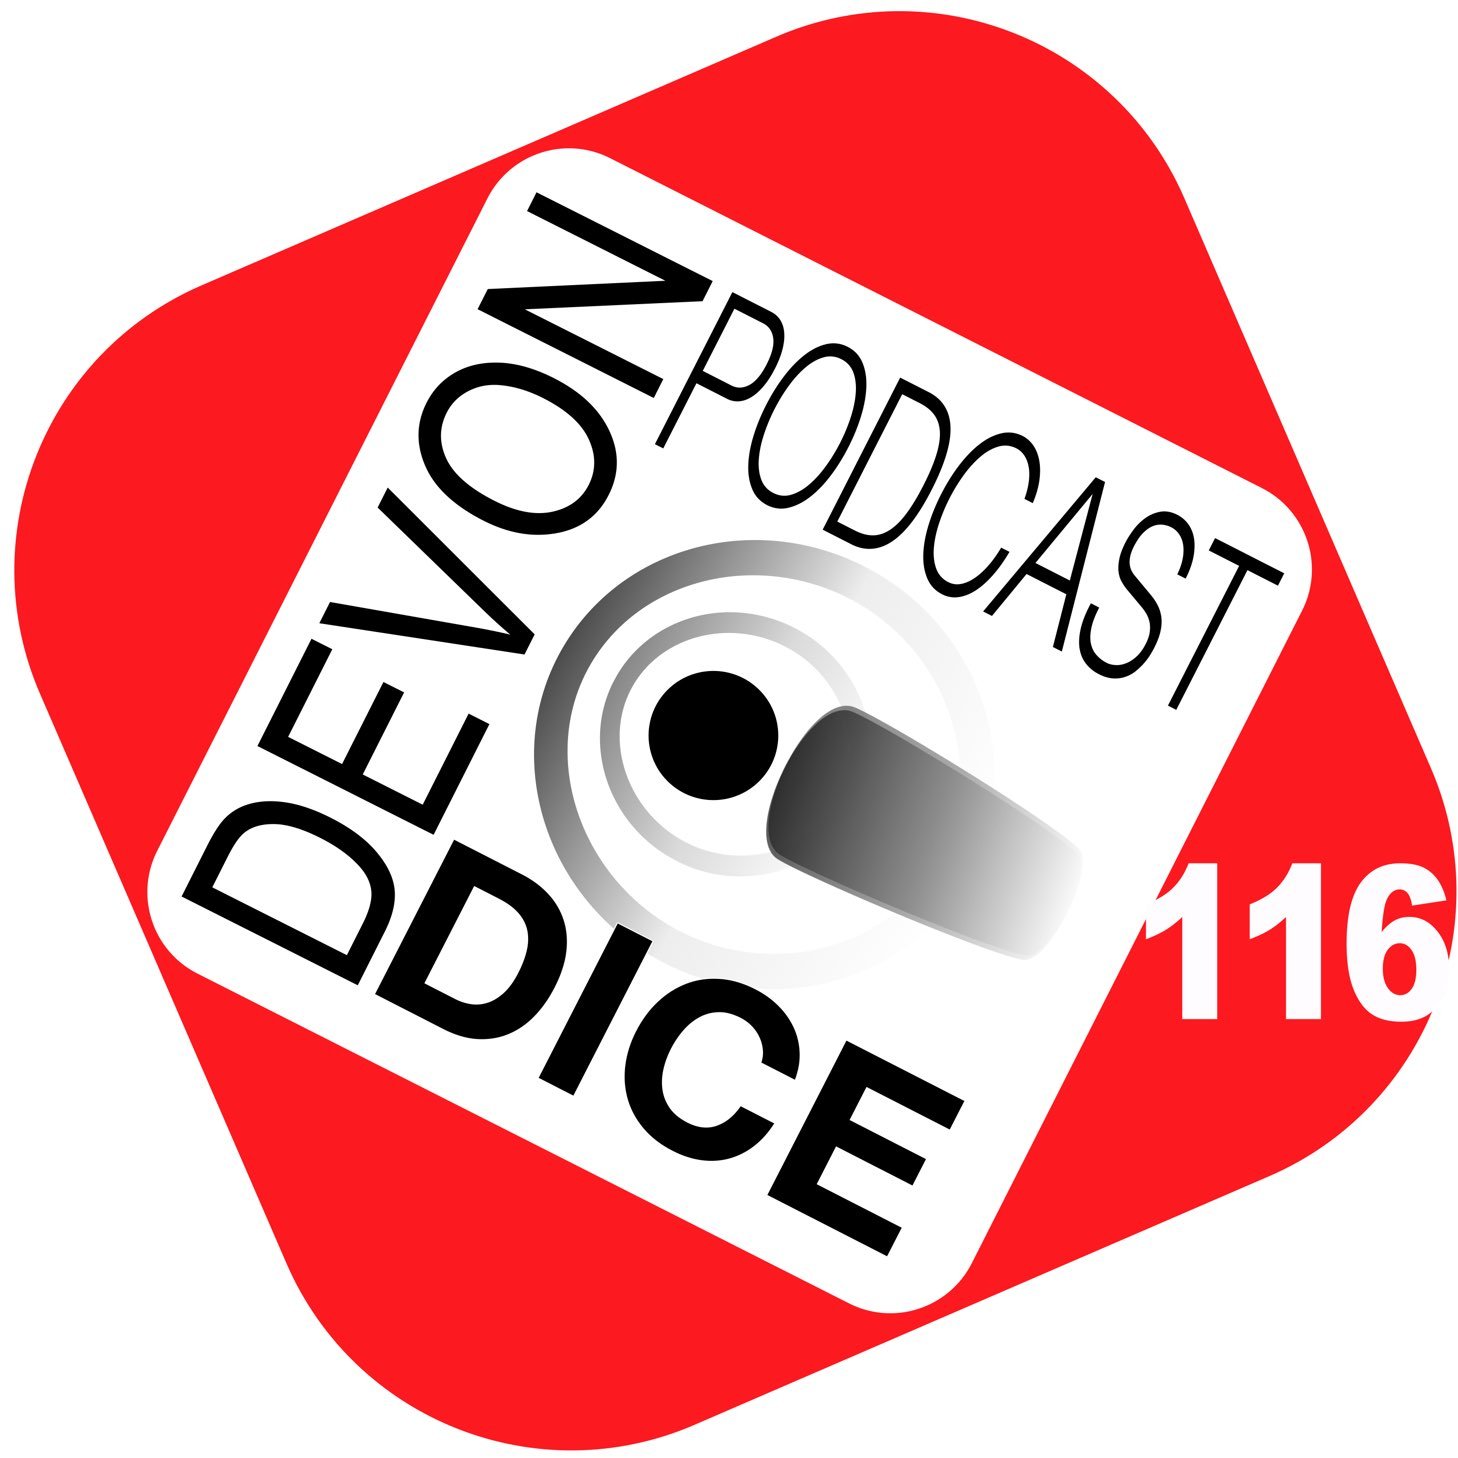 116 Devon Dice Podcast’s Top 10 Board Games from 2014